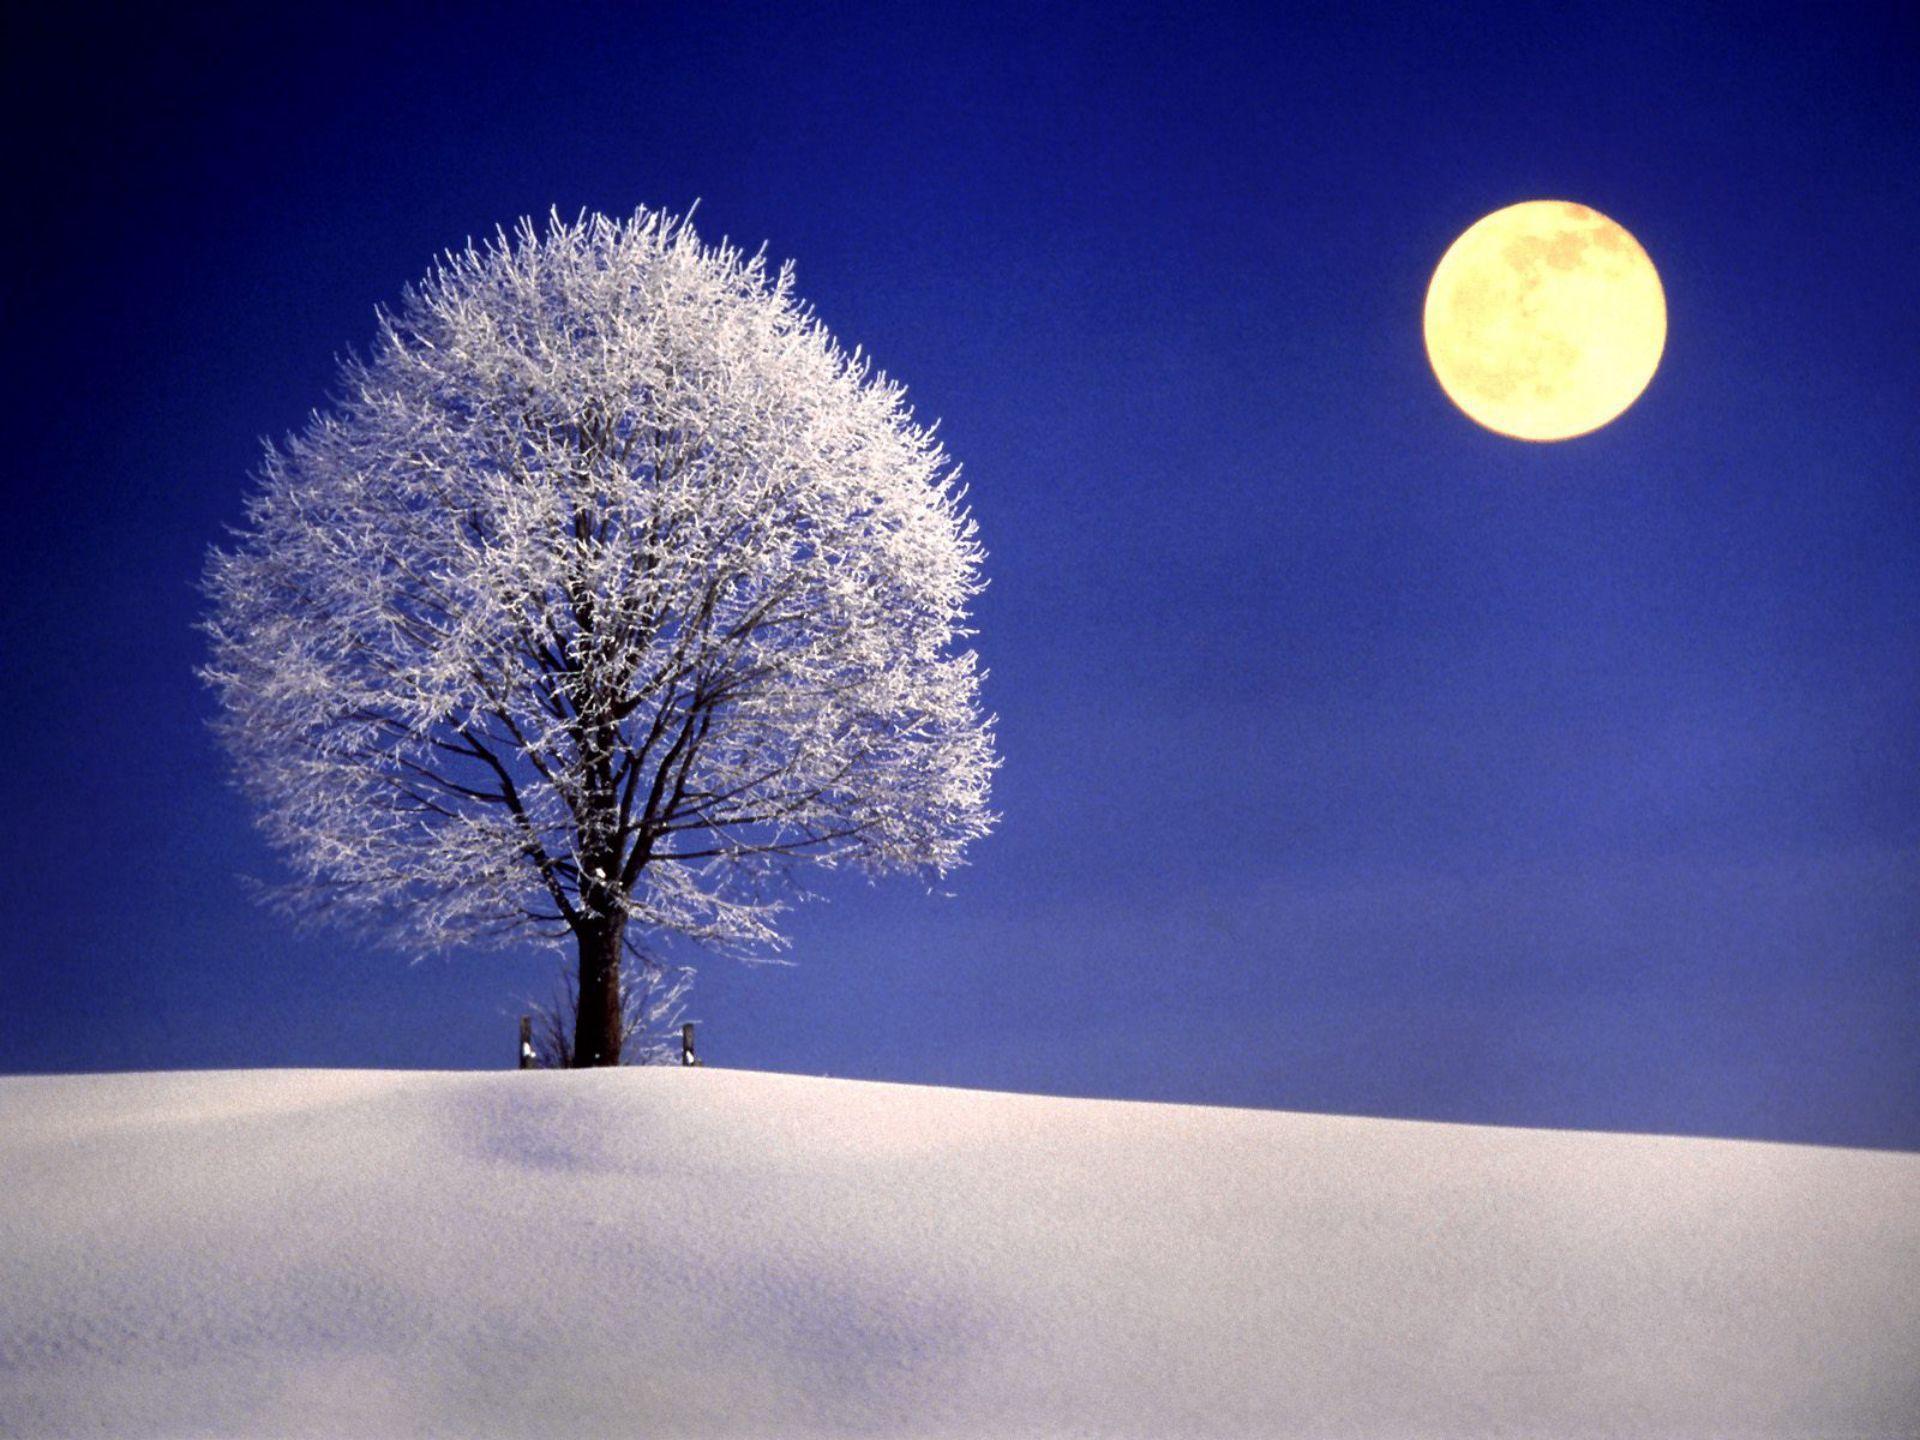 Winter Night with Full Moon widescreen wallpaper. Wide